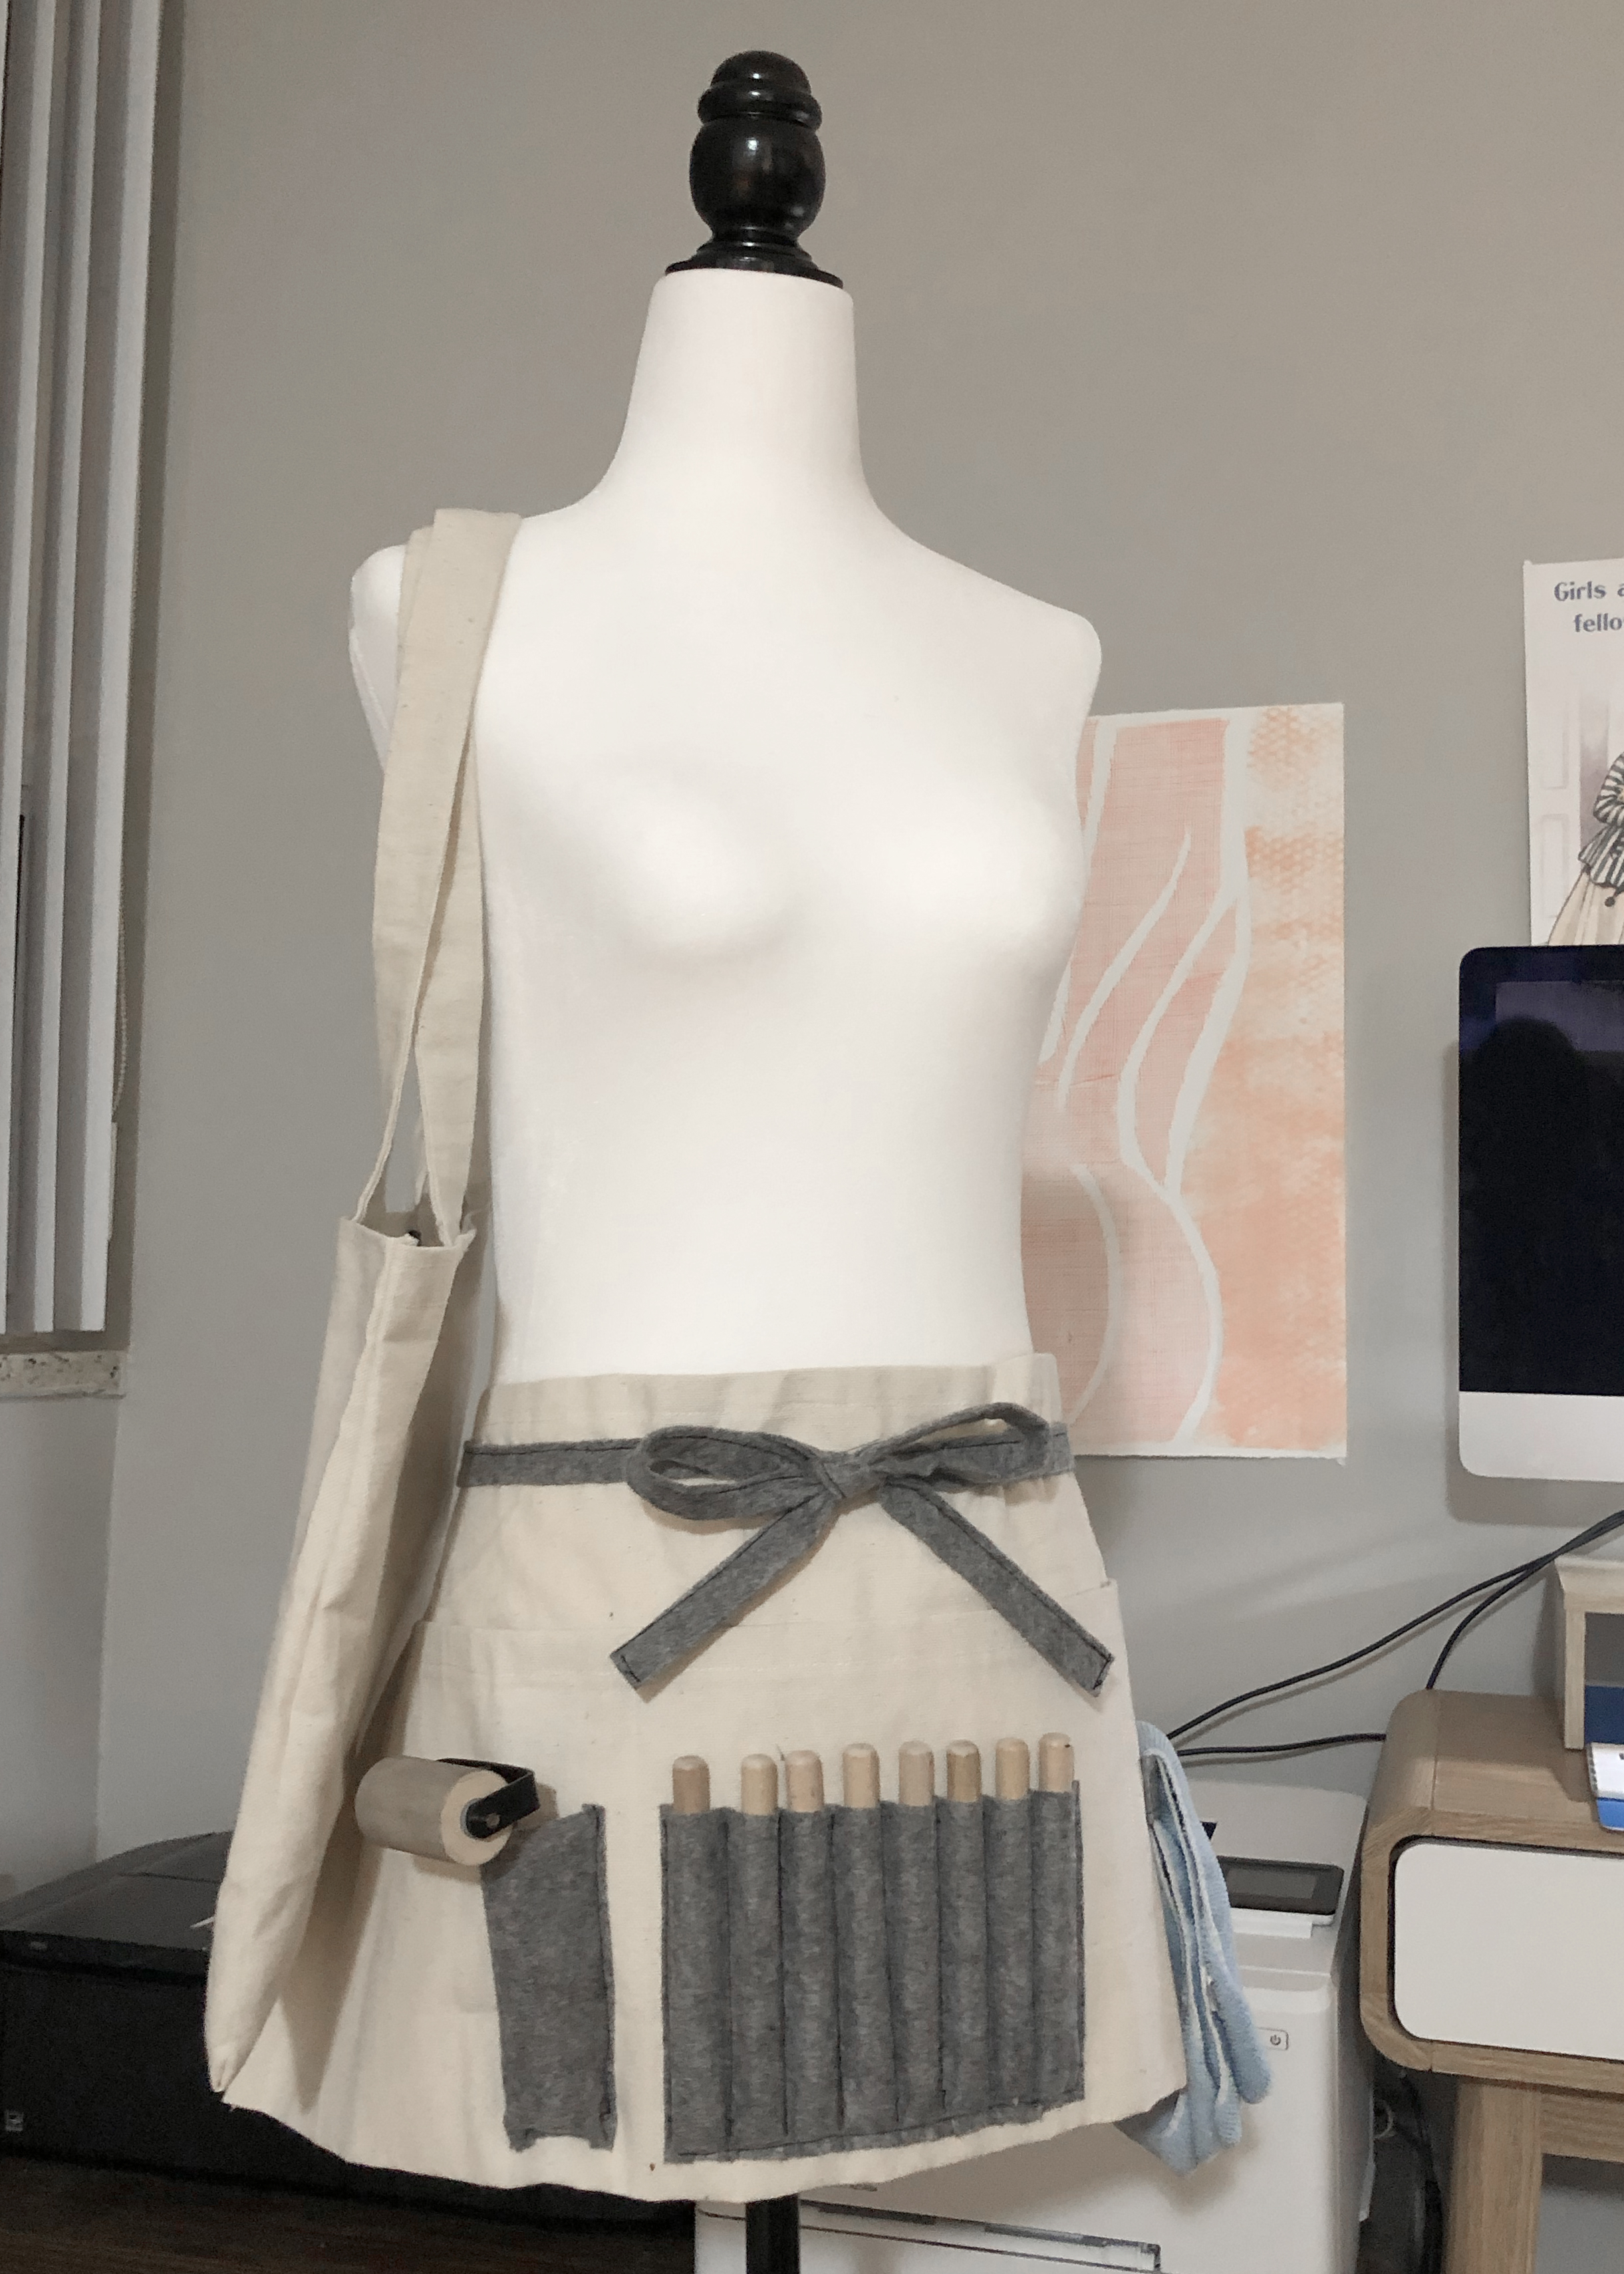 A photo of the canvas bag and half apron displayed on a dress form from head on